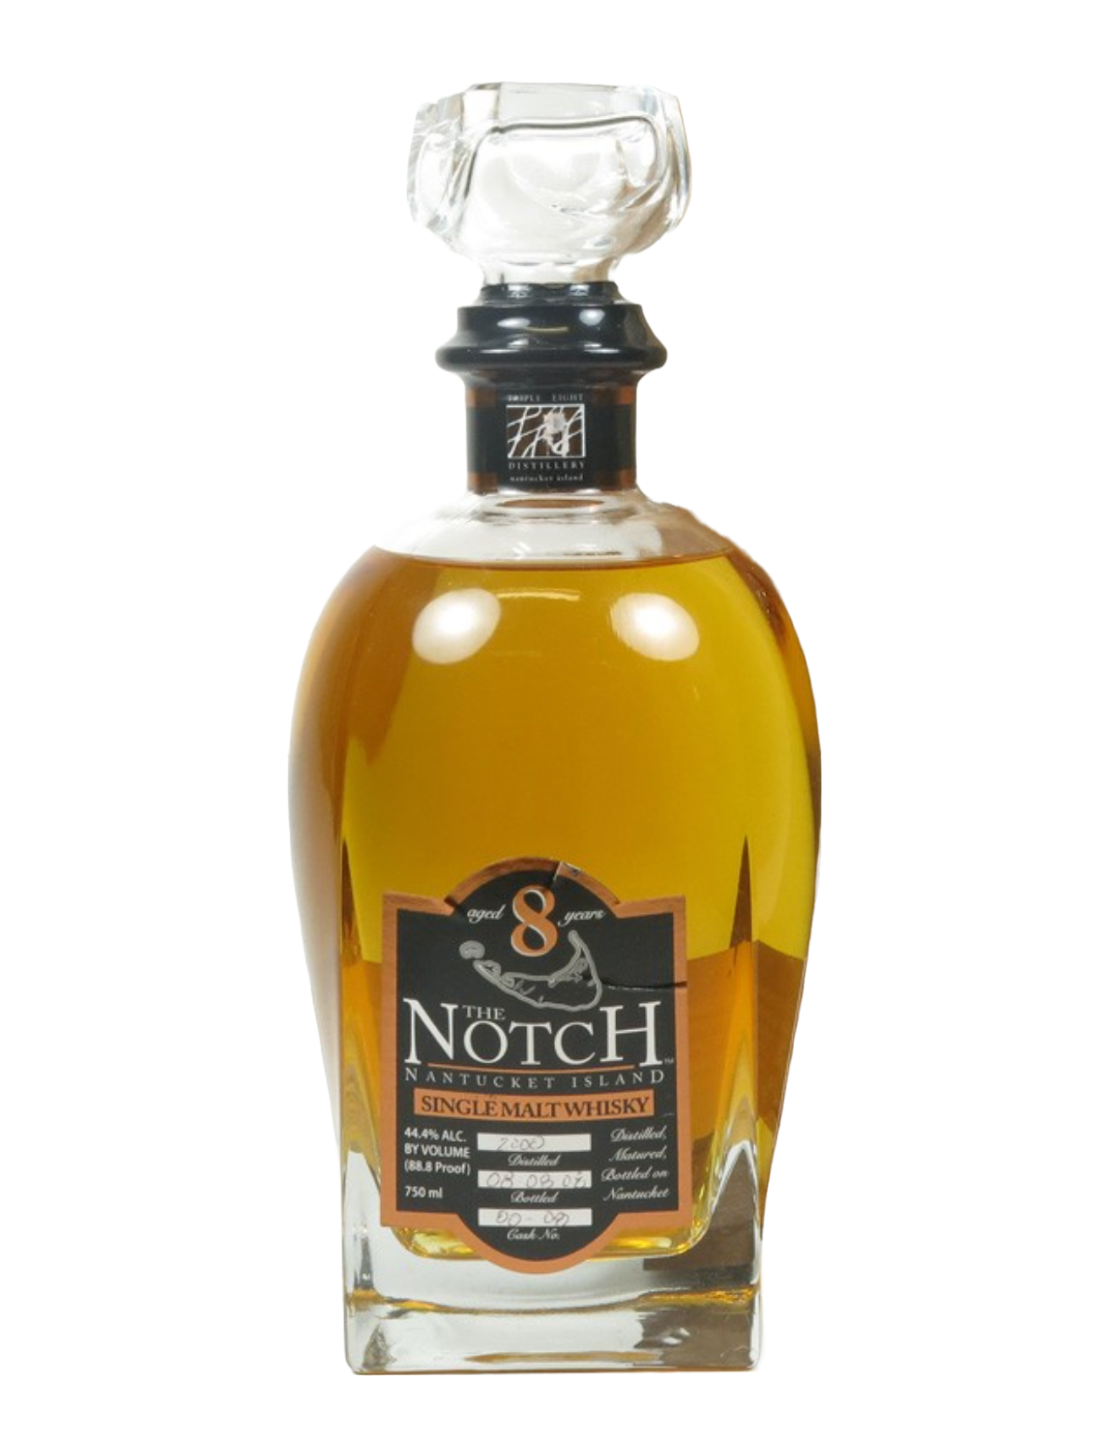 Elegant bottle of Triple 8 The Notch Nantucket Whisky in front of a plain white background